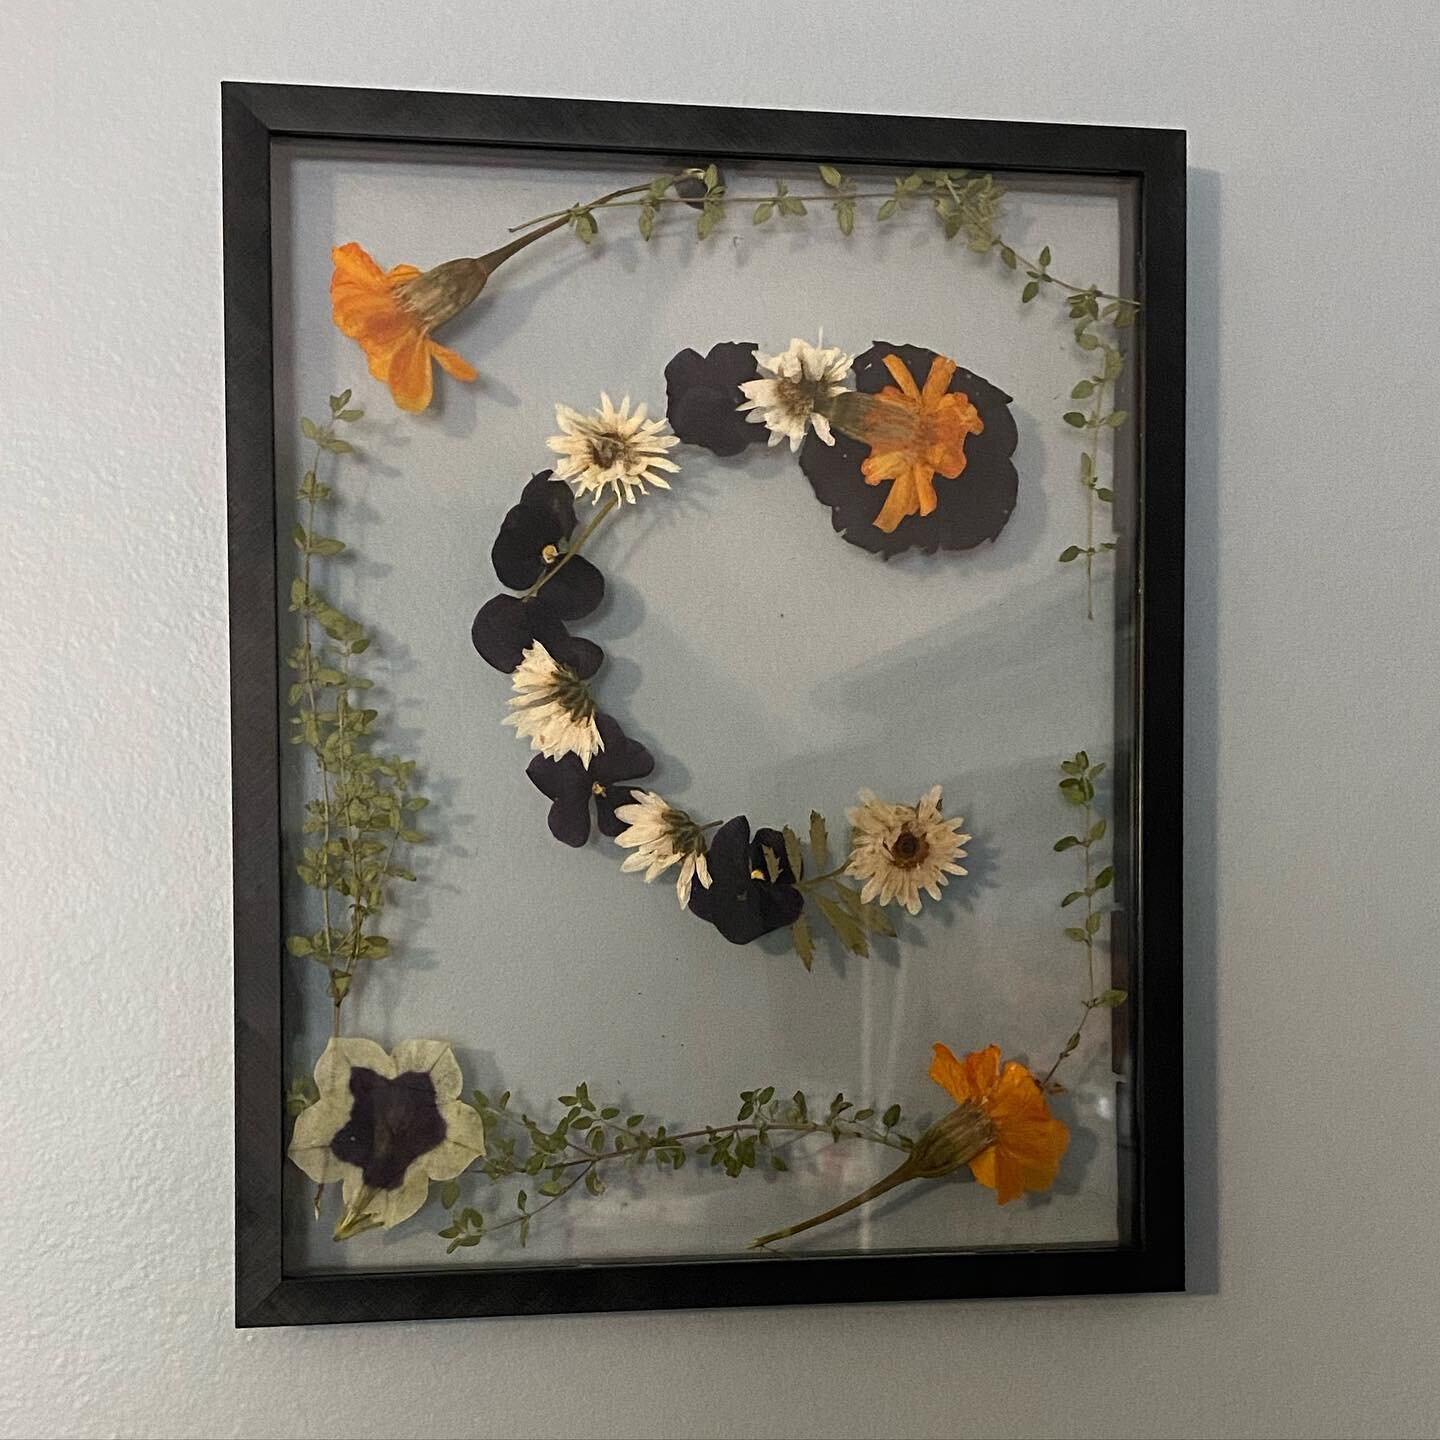 It took me a year but I finally did something with my pressed flowers! :)